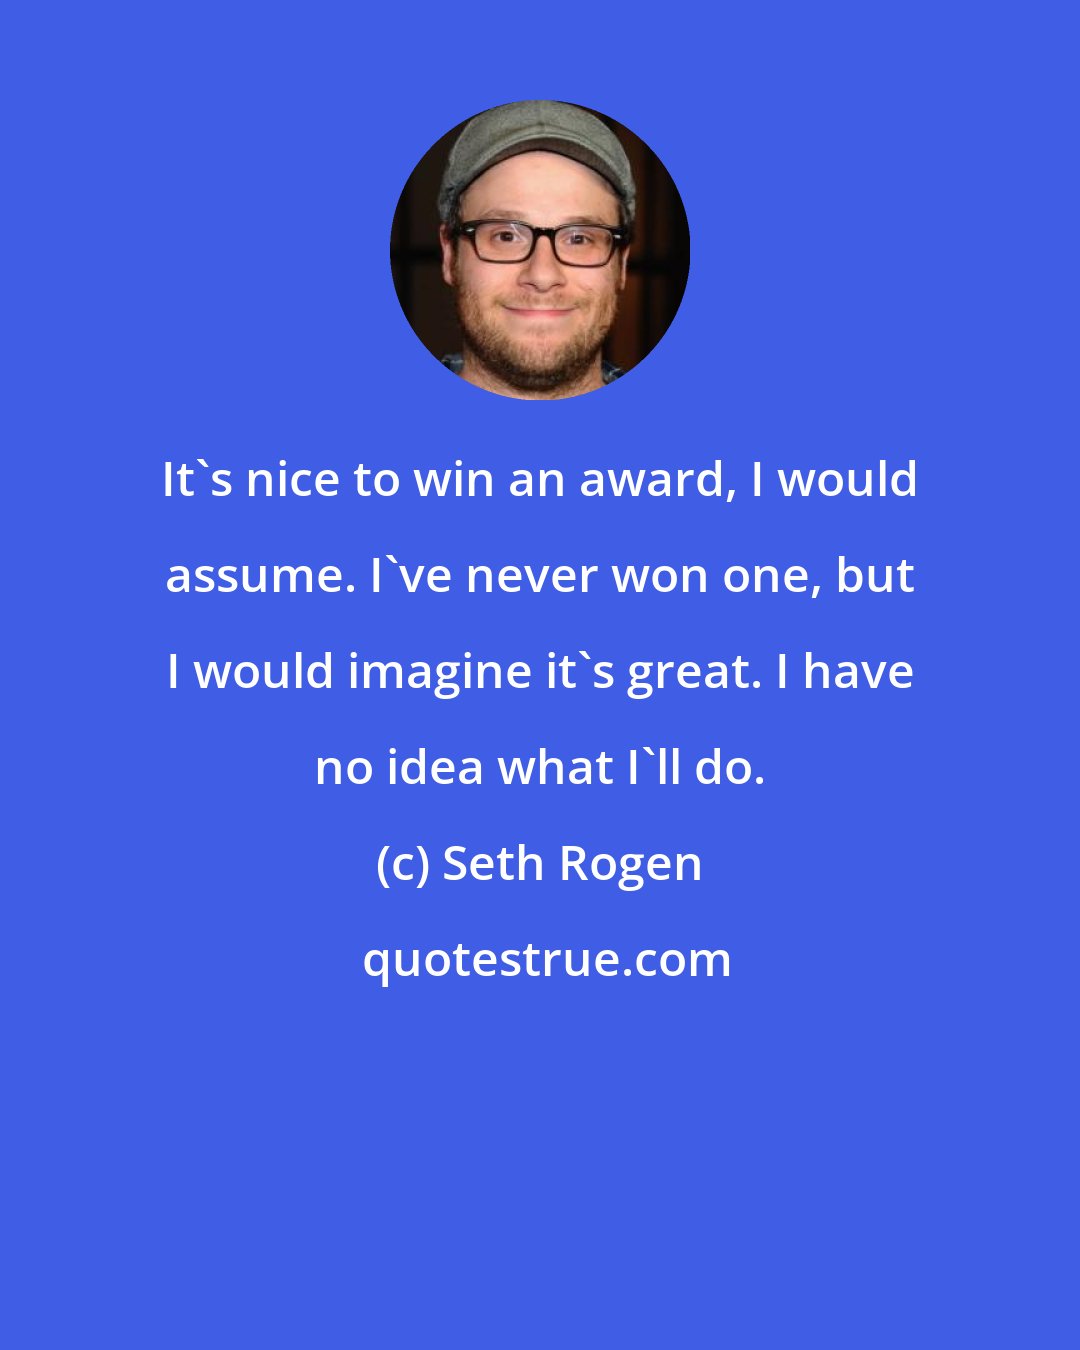 Seth Rogen: It's nice to win an award, I would assume. I've never won one, but I would imagine it's great. I have no idea what I'll do.